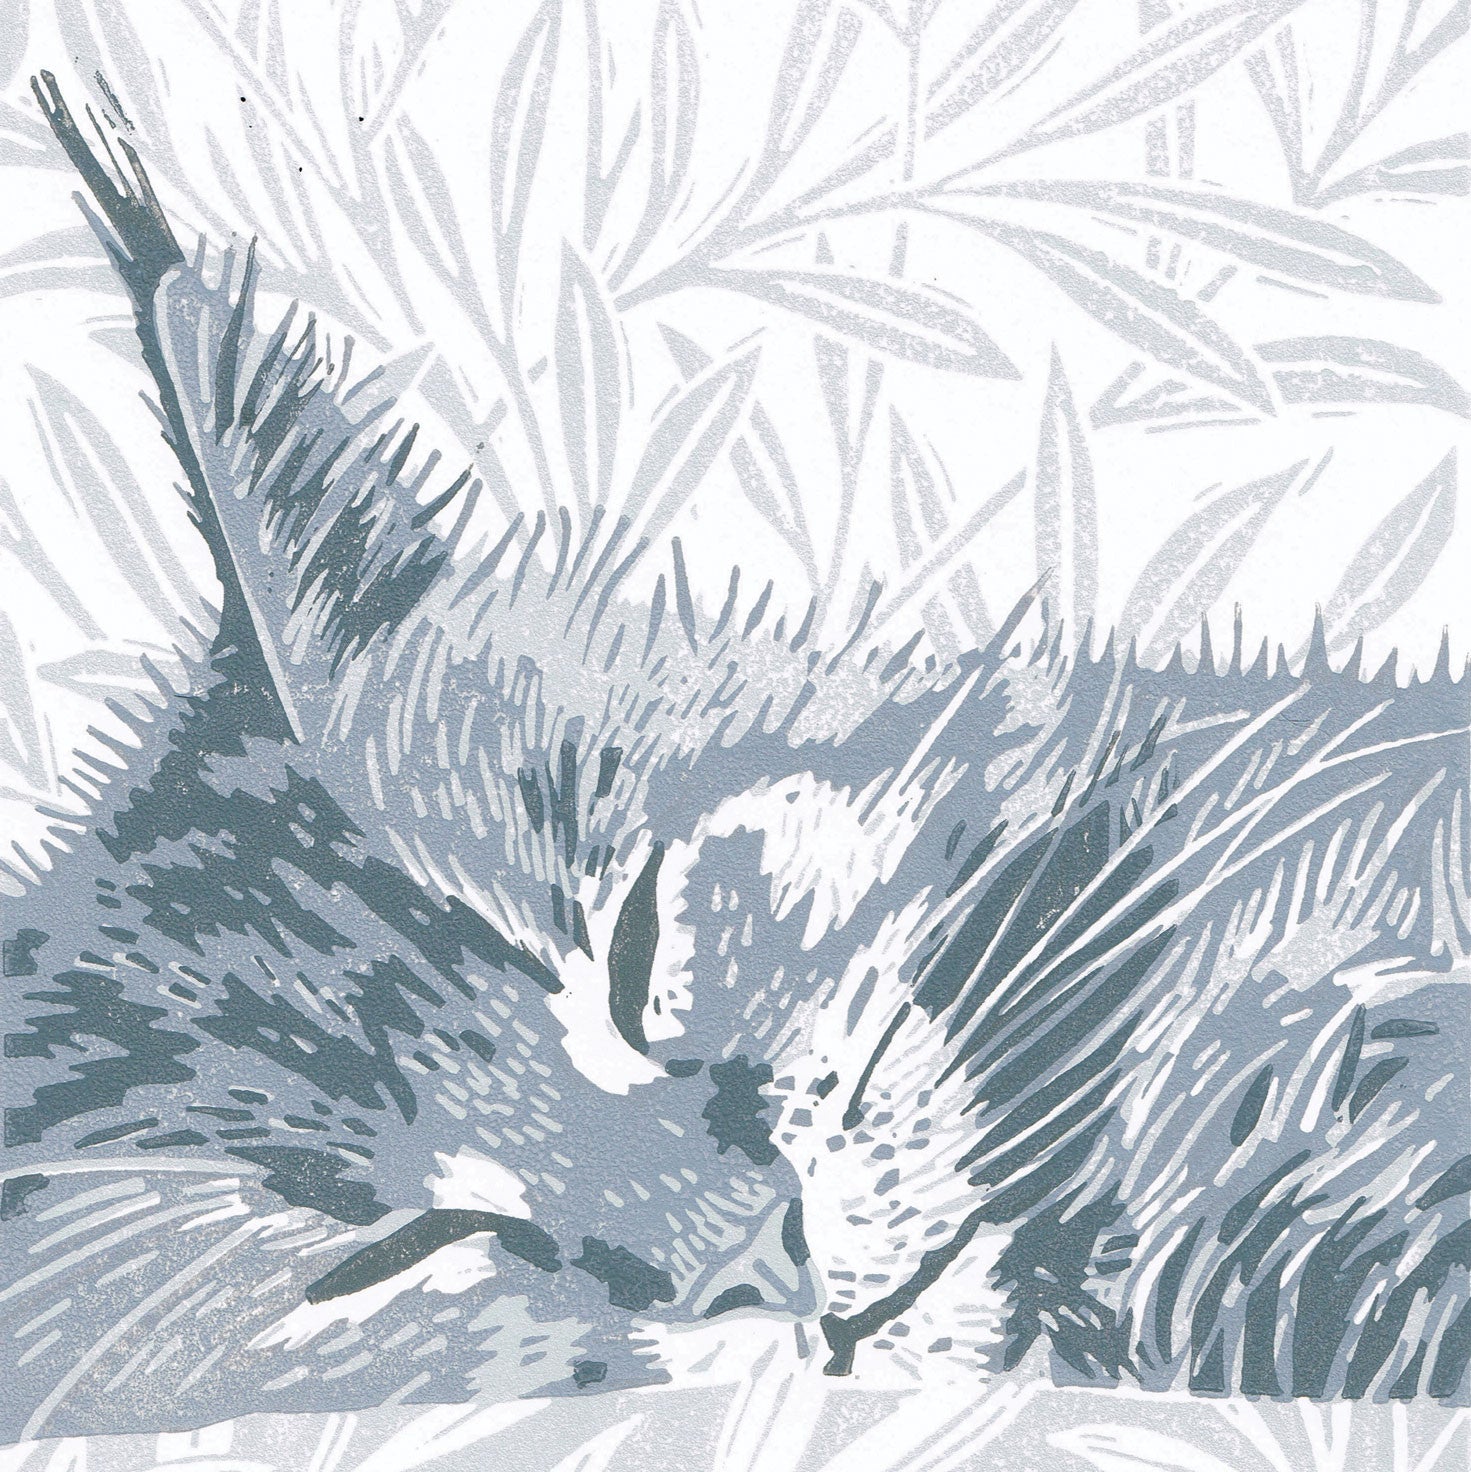 Grey Maine Coon Cat by Little Ram Studio, Art Greeting Card, Linocut, Maine Coon cat dozing on pillow